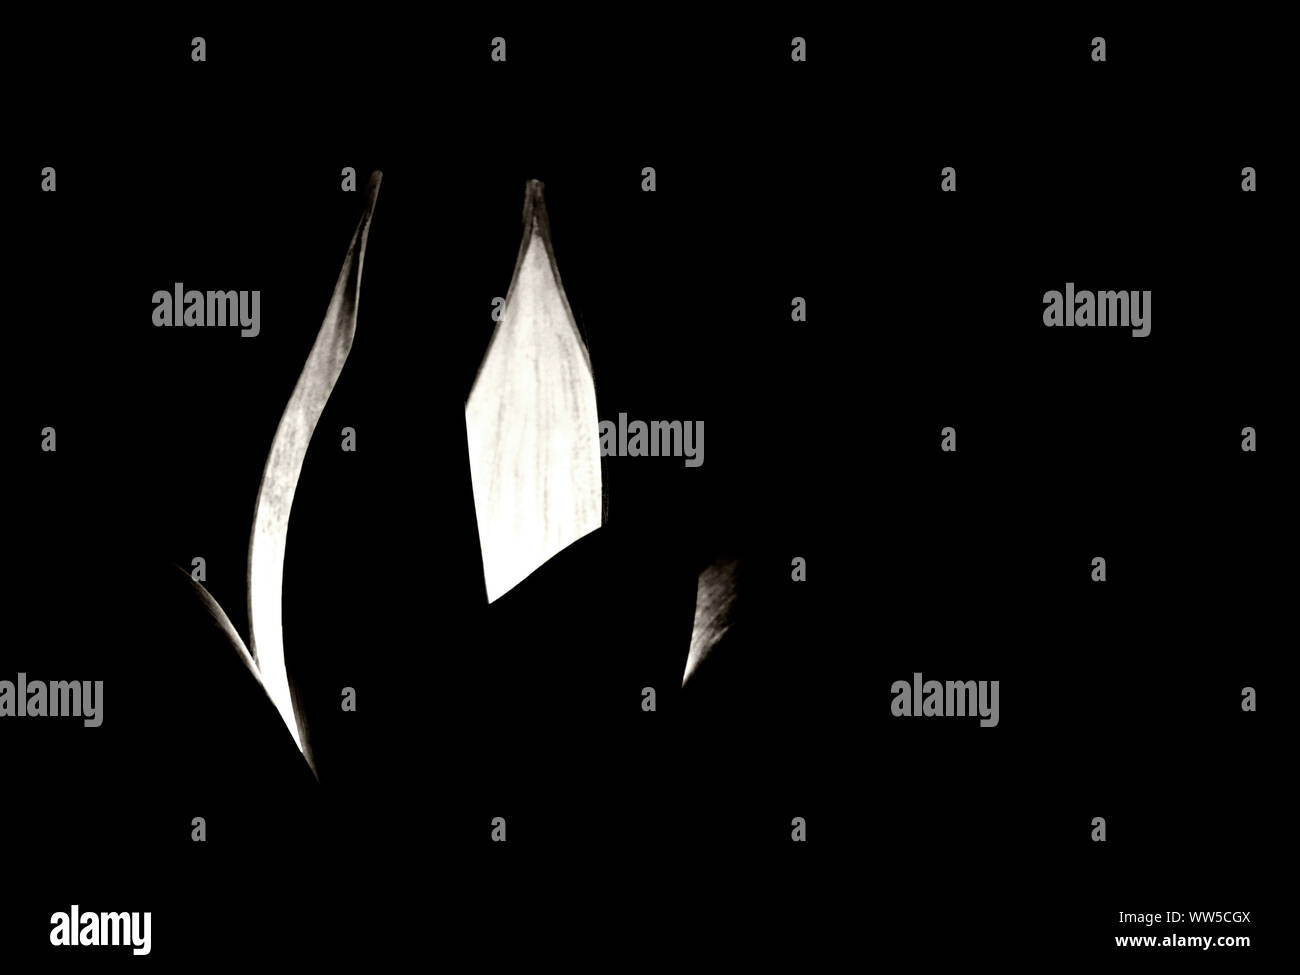 The shot of a lamp in the shape of a tulip in the darkness, Stock Photo